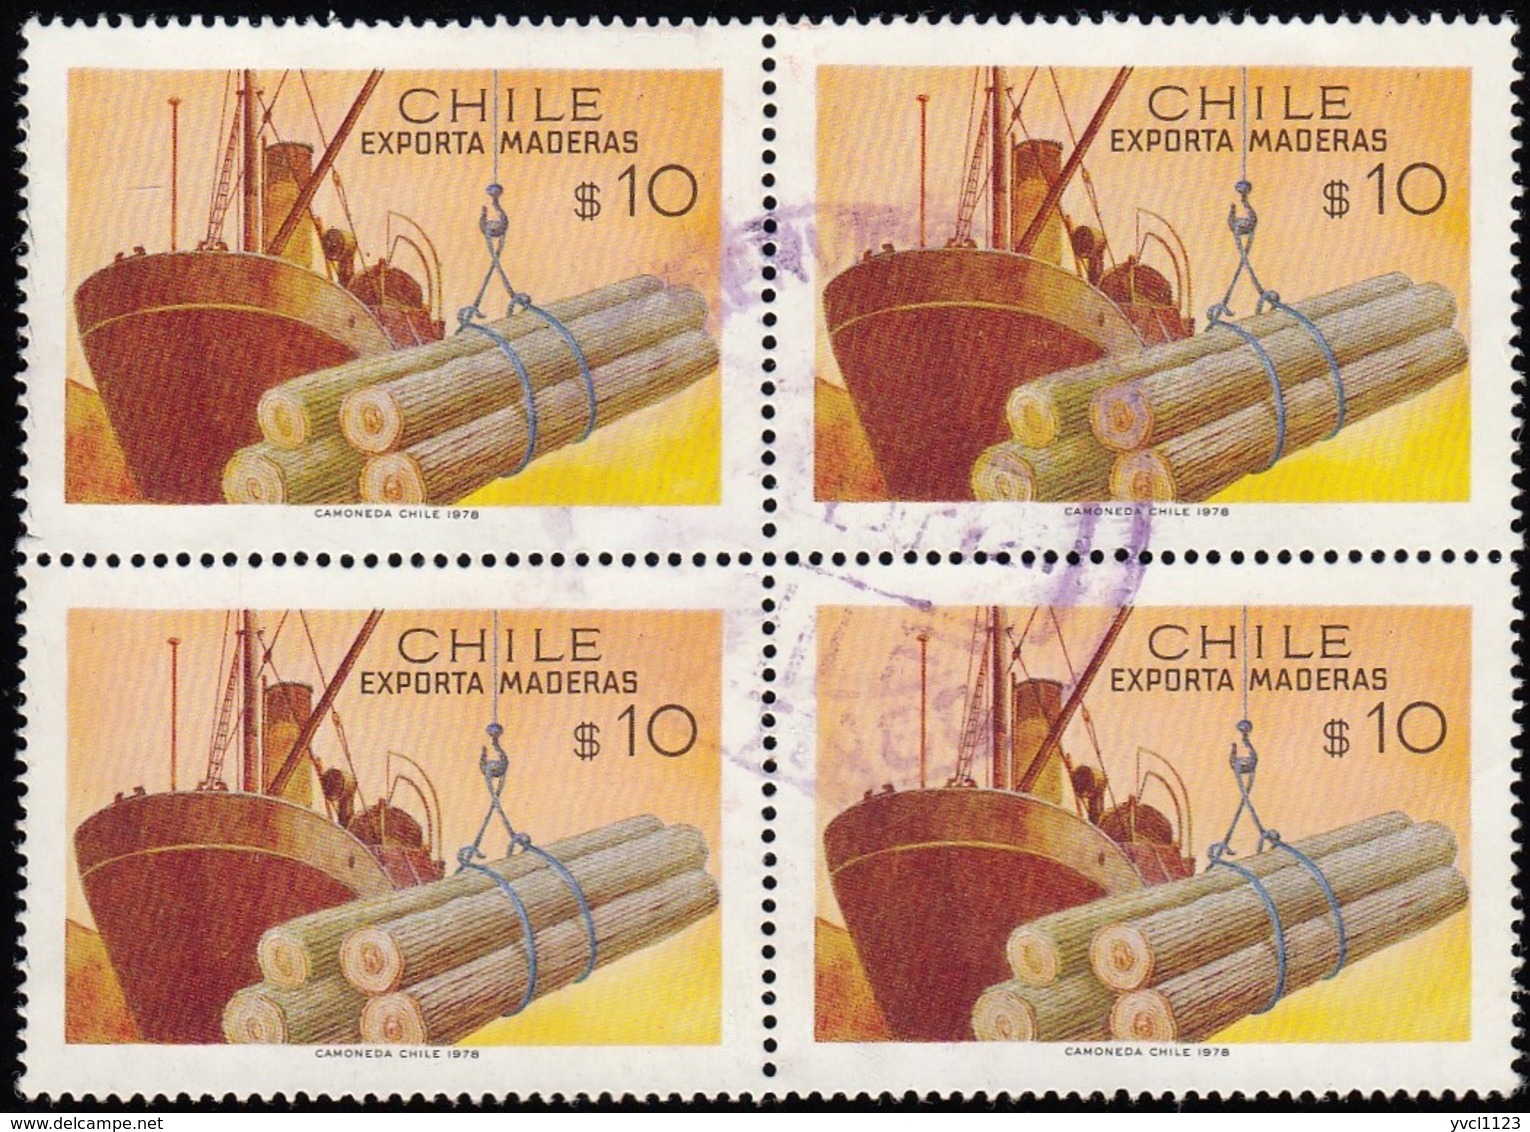 CHILE - Scott #515 Loading Timber / Used Block Of 4 Stamps (bk1102) - Chile